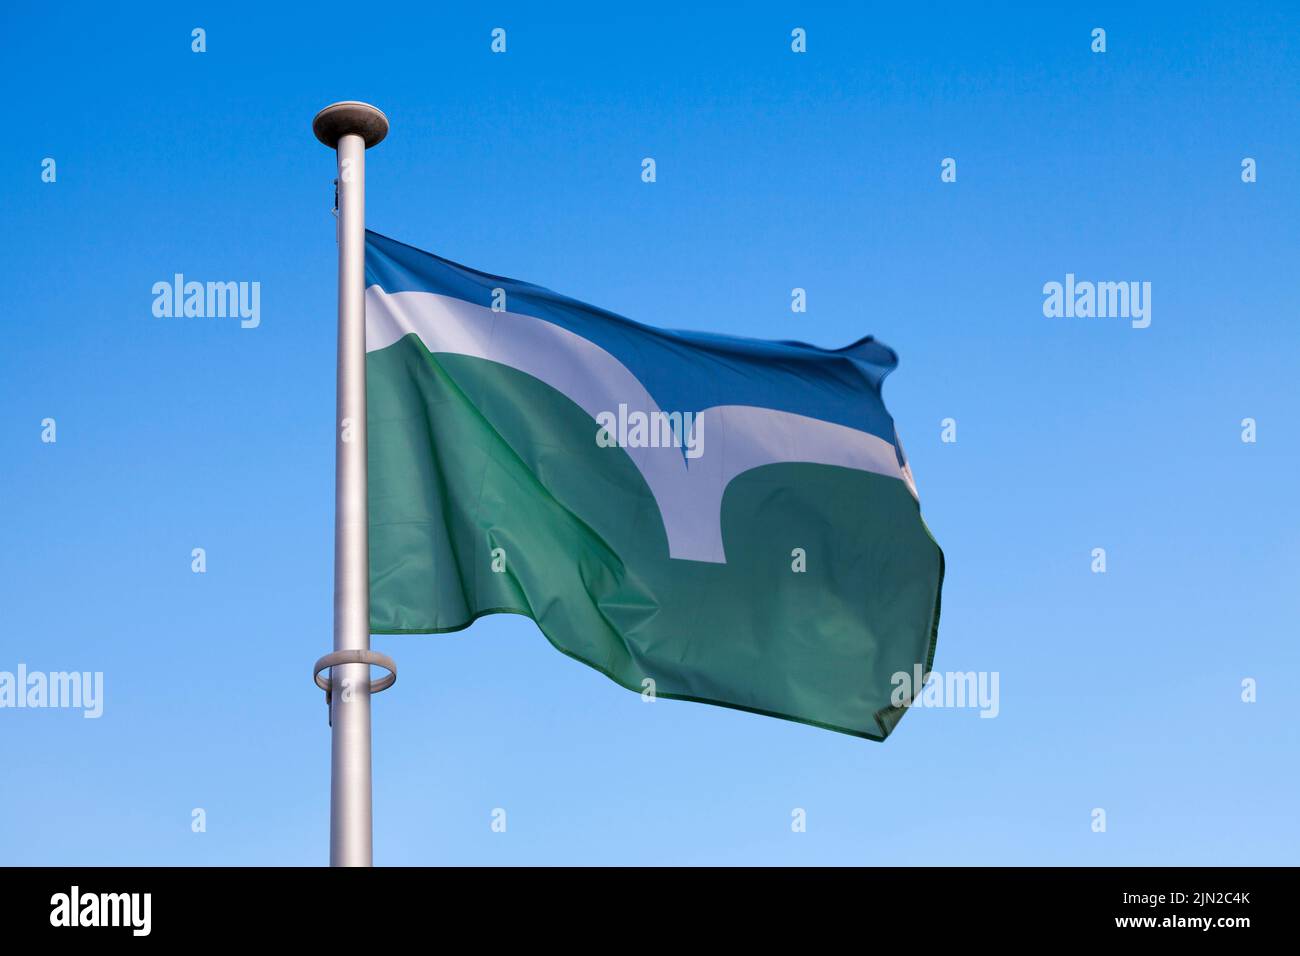 Close-up on the Flag of Côtes-d'Armor (Brittany - France) waving on top of a pole. Stock Photo